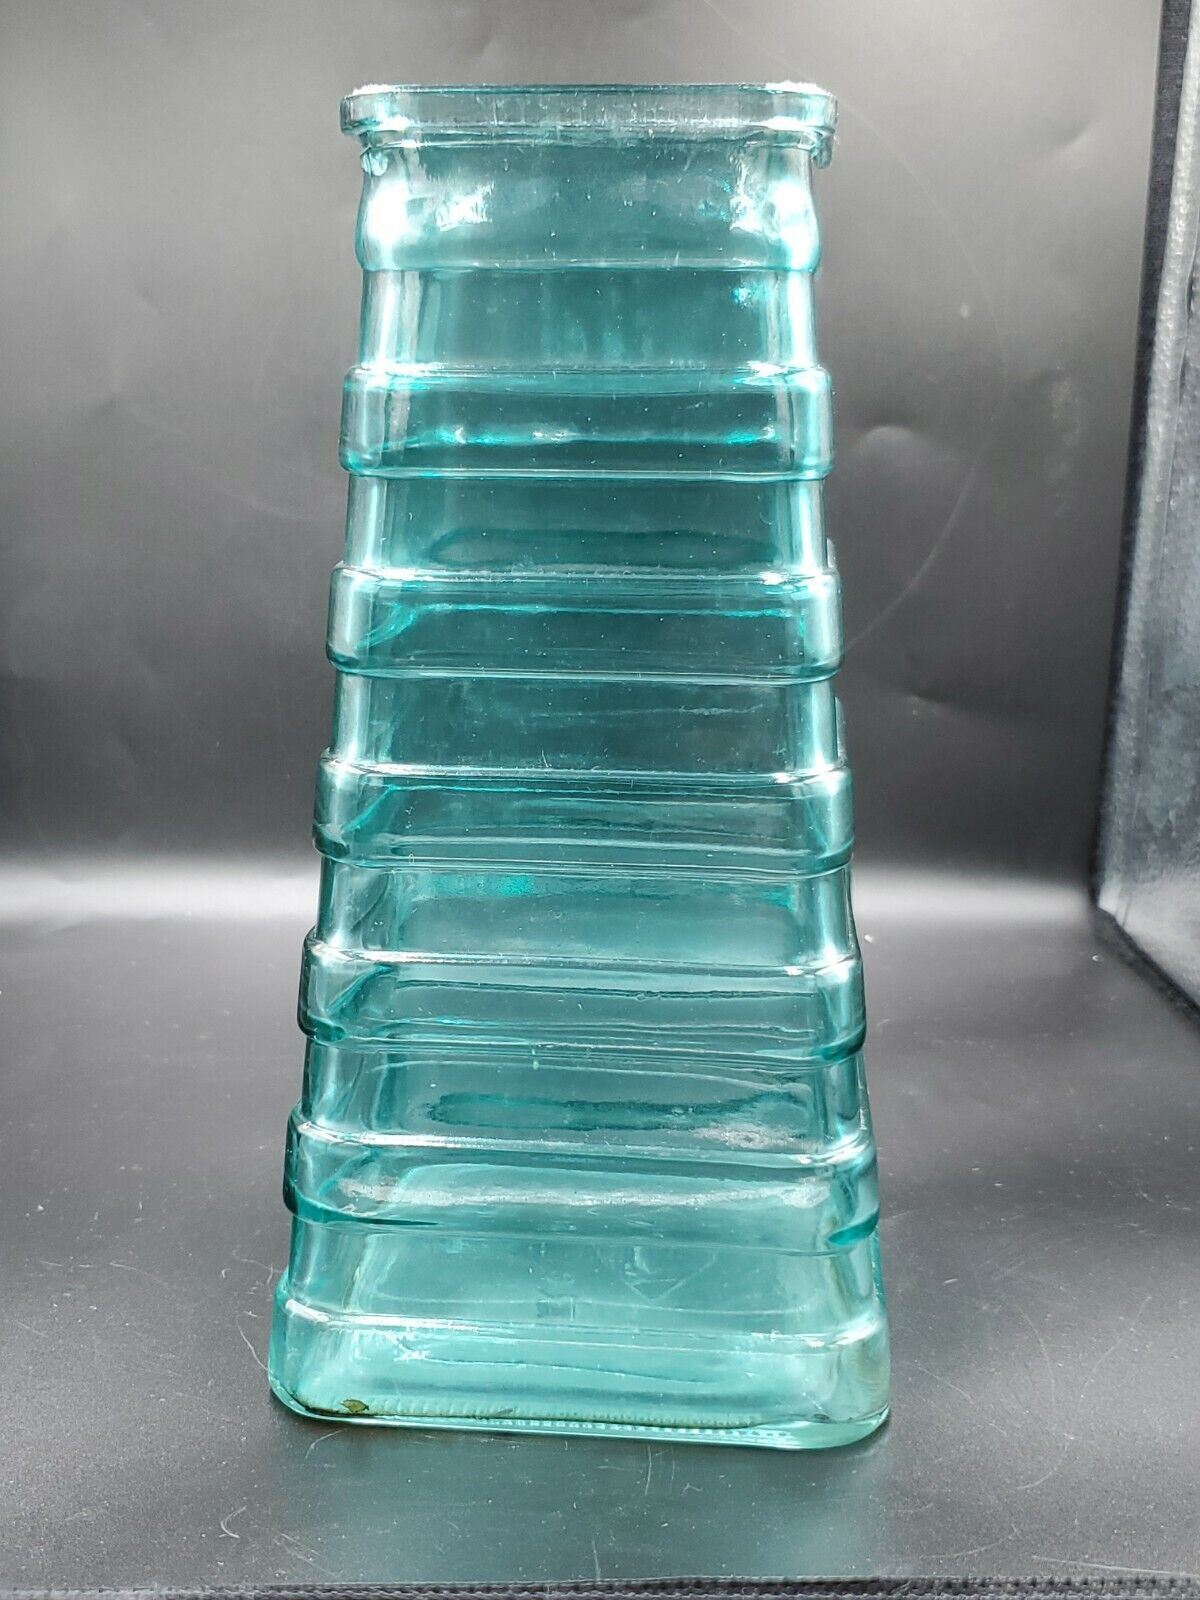 DPS Recycled Glass Teal blue Tiered Vase 9" tall 4.5" across bottom.